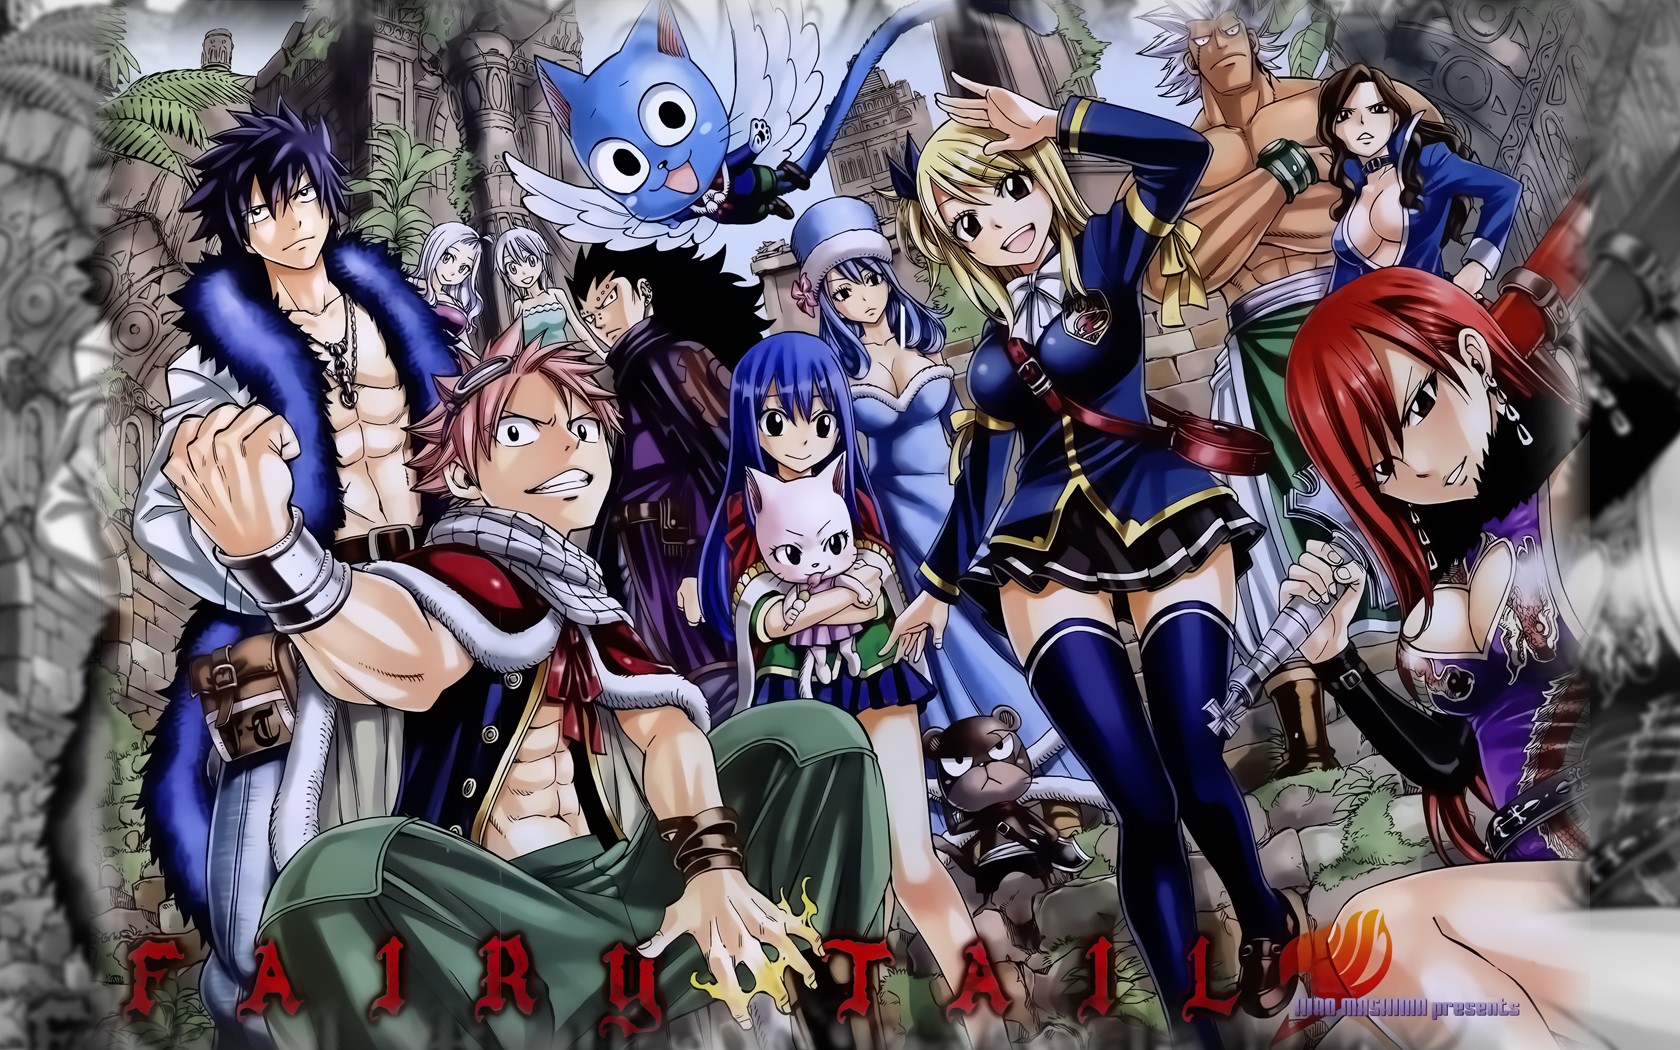 Fairy Tail Anime Wallpaper Image